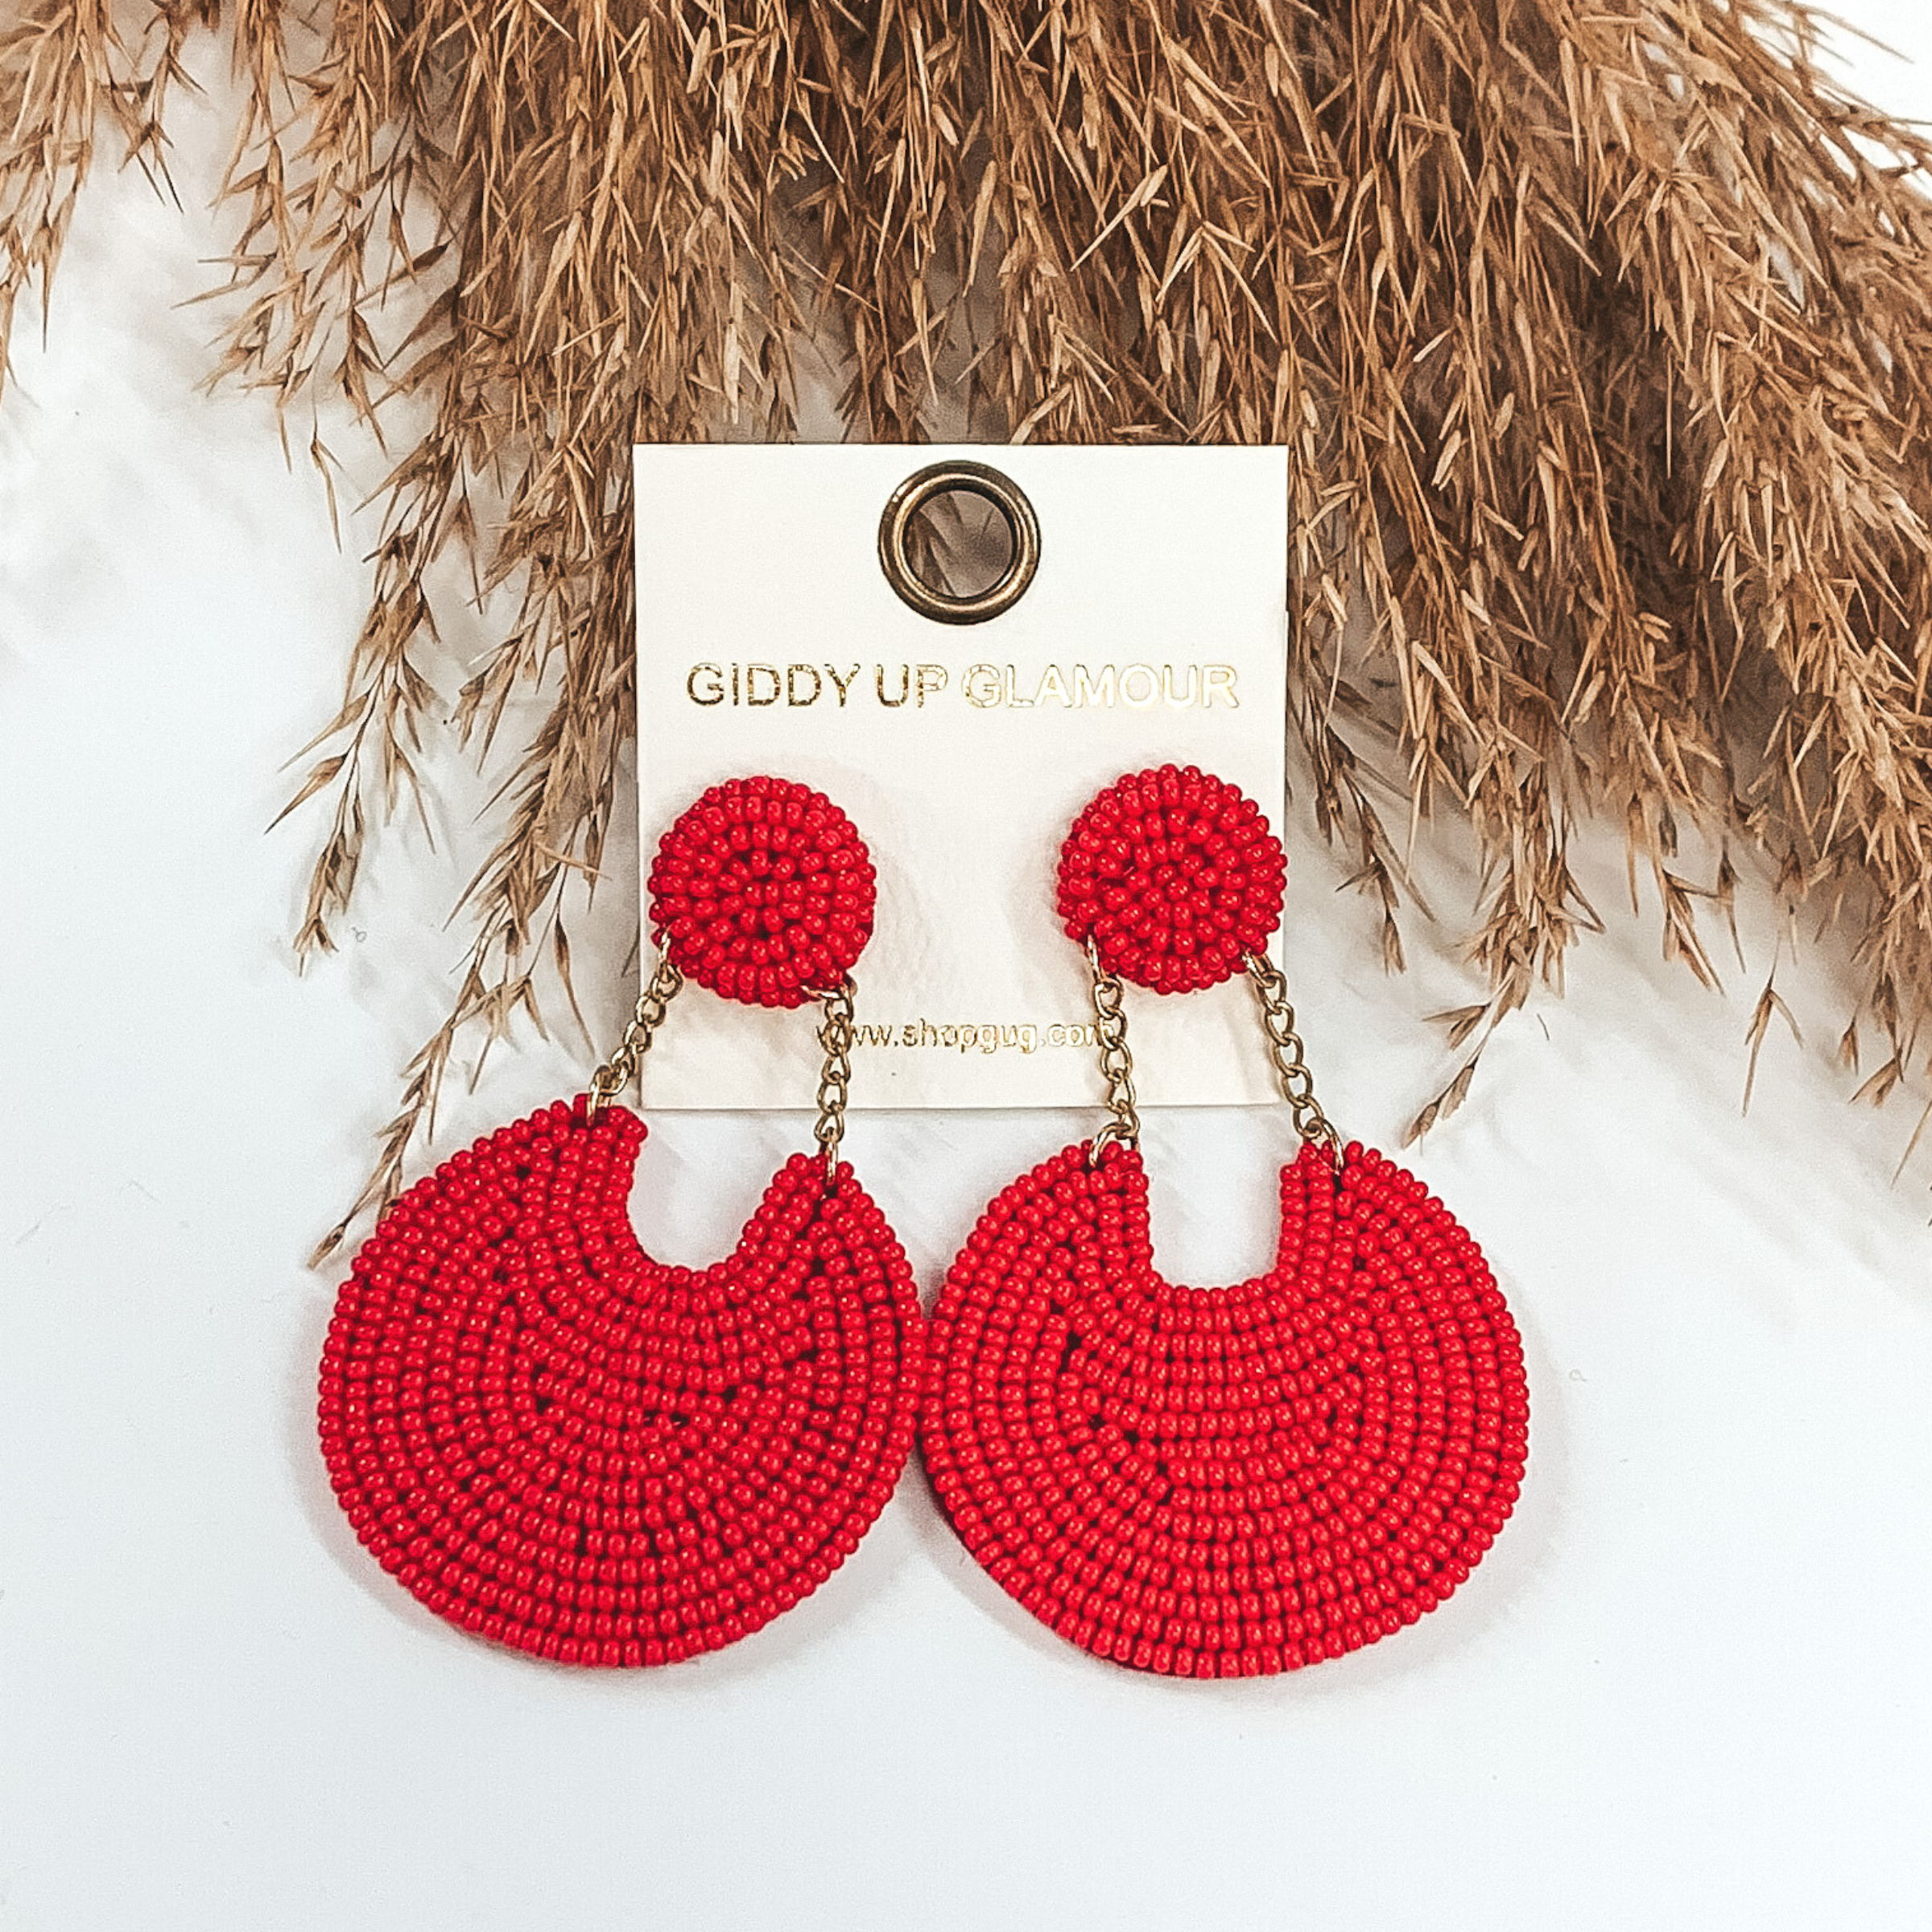 These earrings are covered in red beads. There is a circle stud with two gold chains that hold a bigger, hanging circle that has a notch out of the top. These earrings are pictured on a white background with tan floral at the top of the picture.